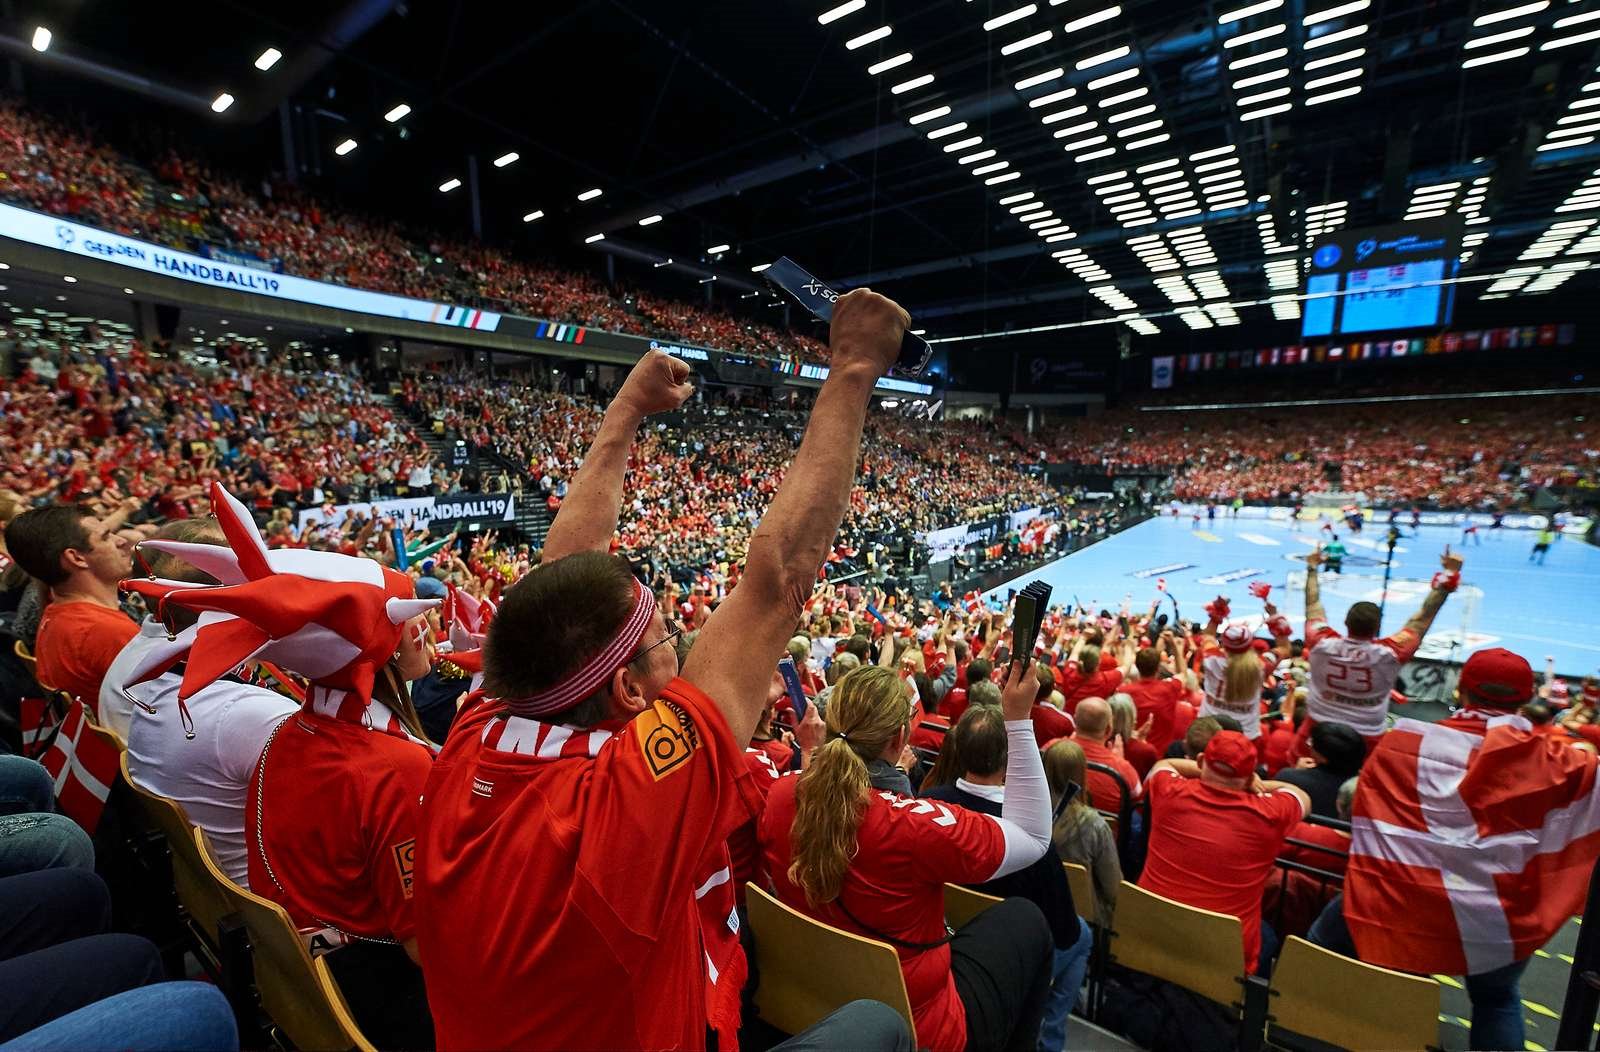 Denmark have teamed up with Norway and Sweden to bid for the event ©Danish Handball Federation